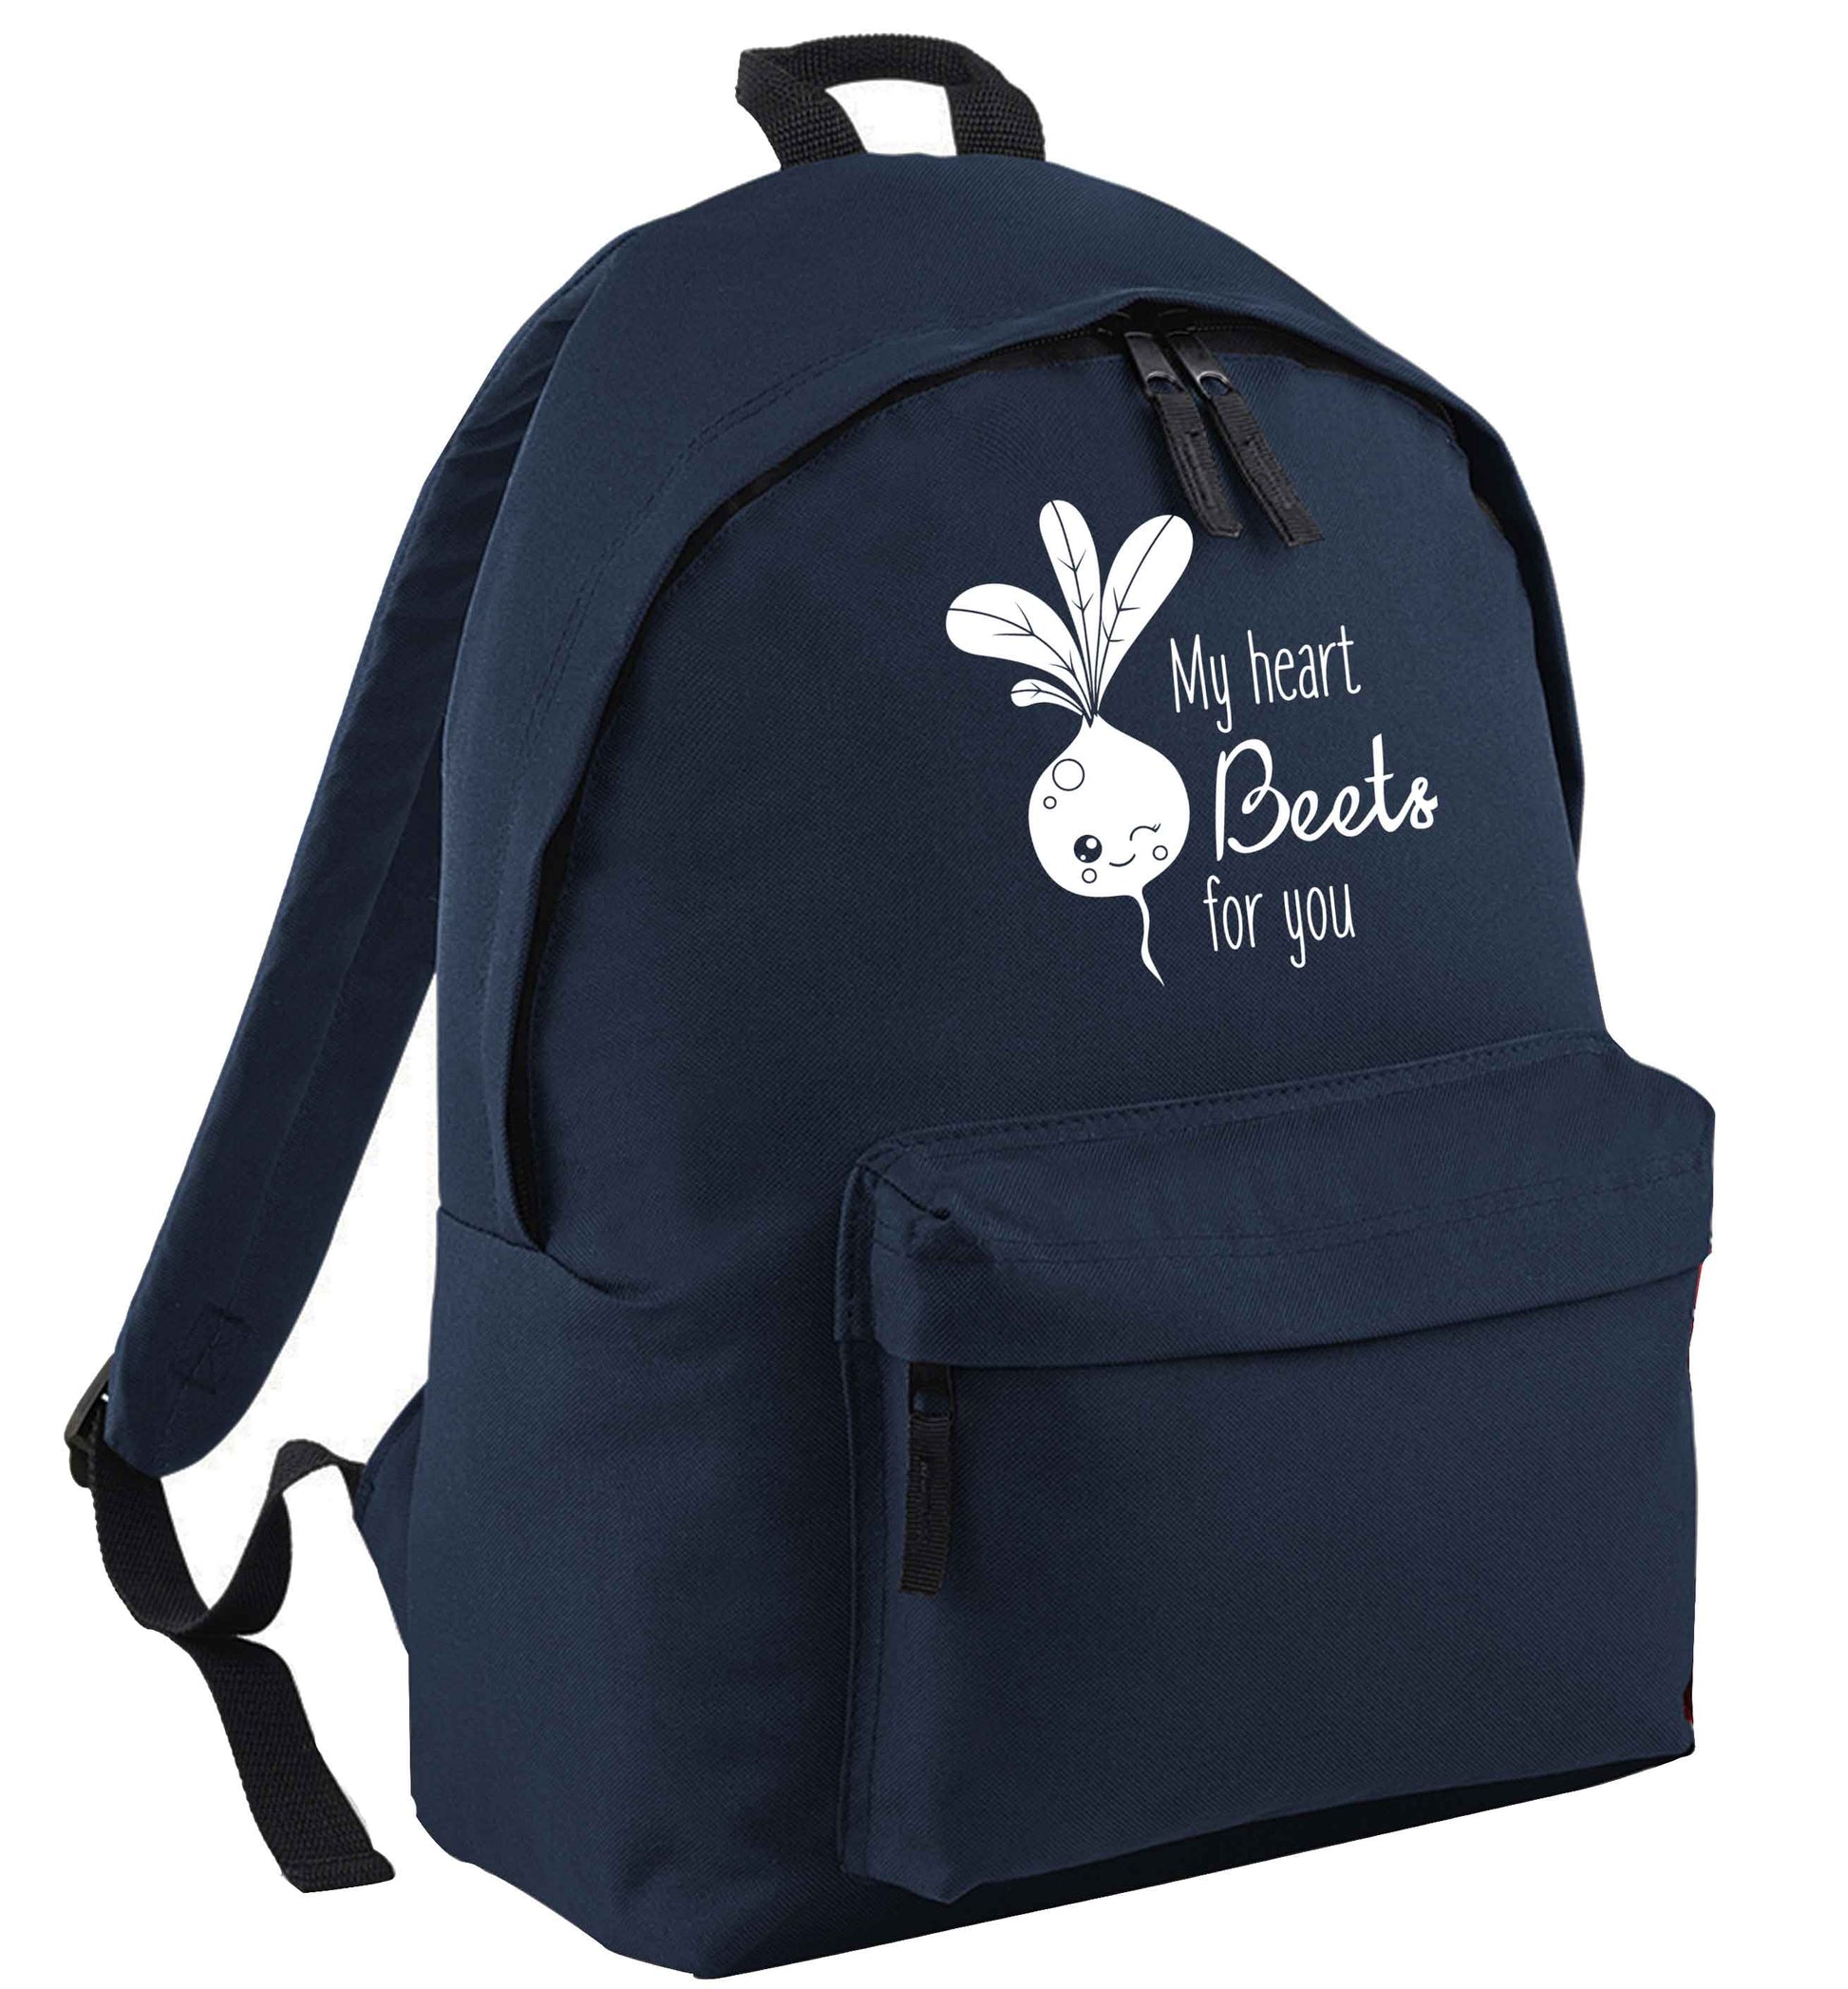 My heart beets for you | Children's backpack